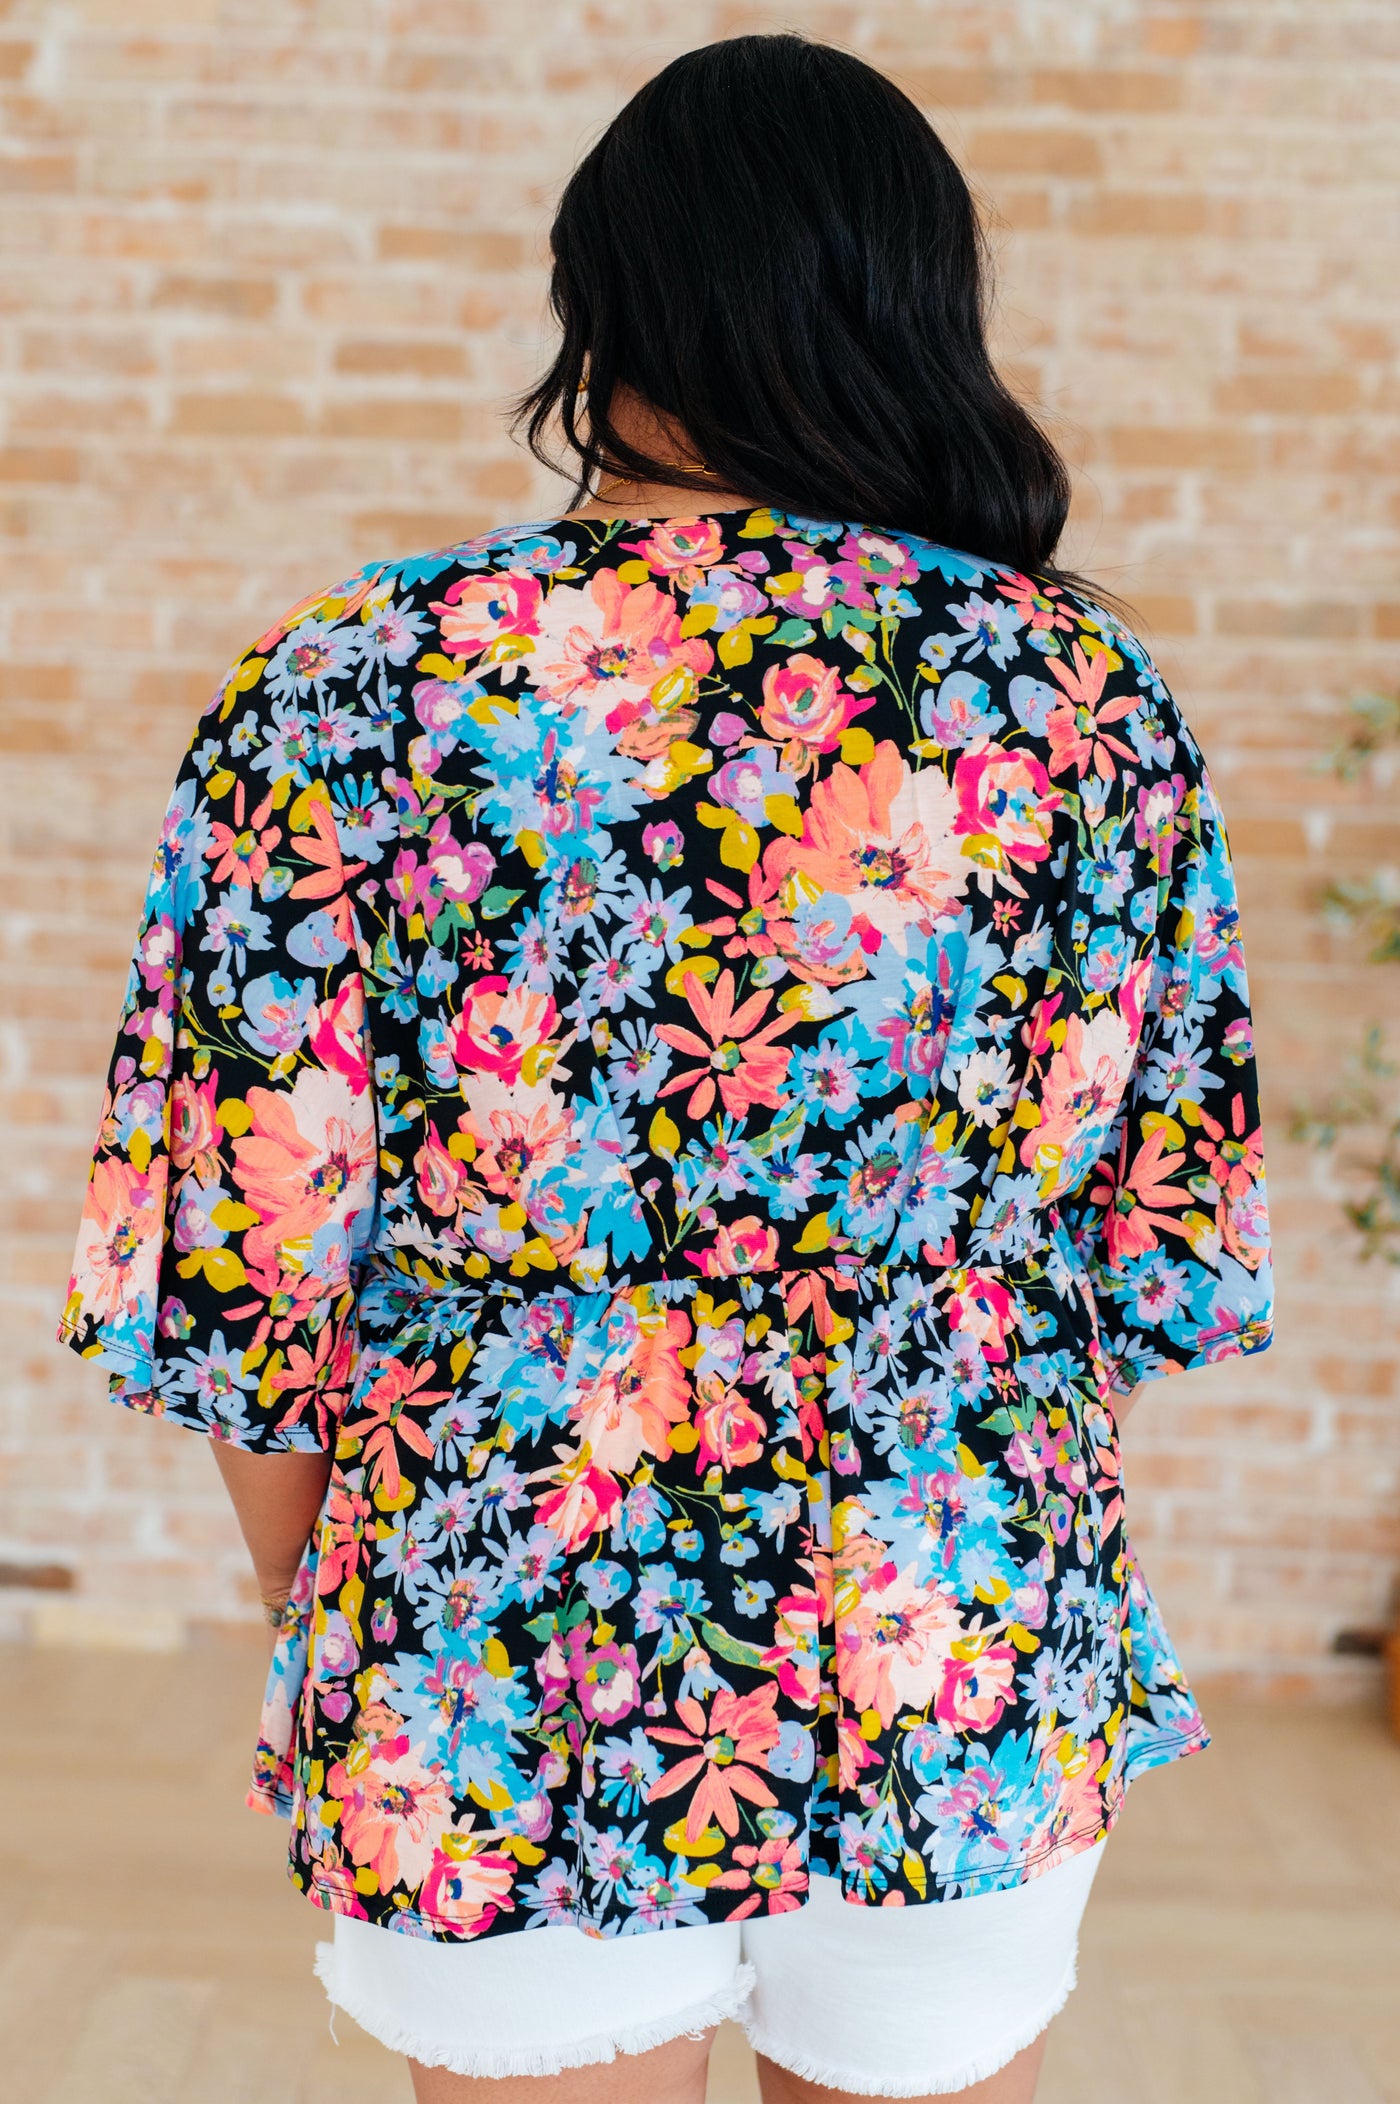 Dreamer Peplum Top in Black Multi Floral Southern Soul Collectives